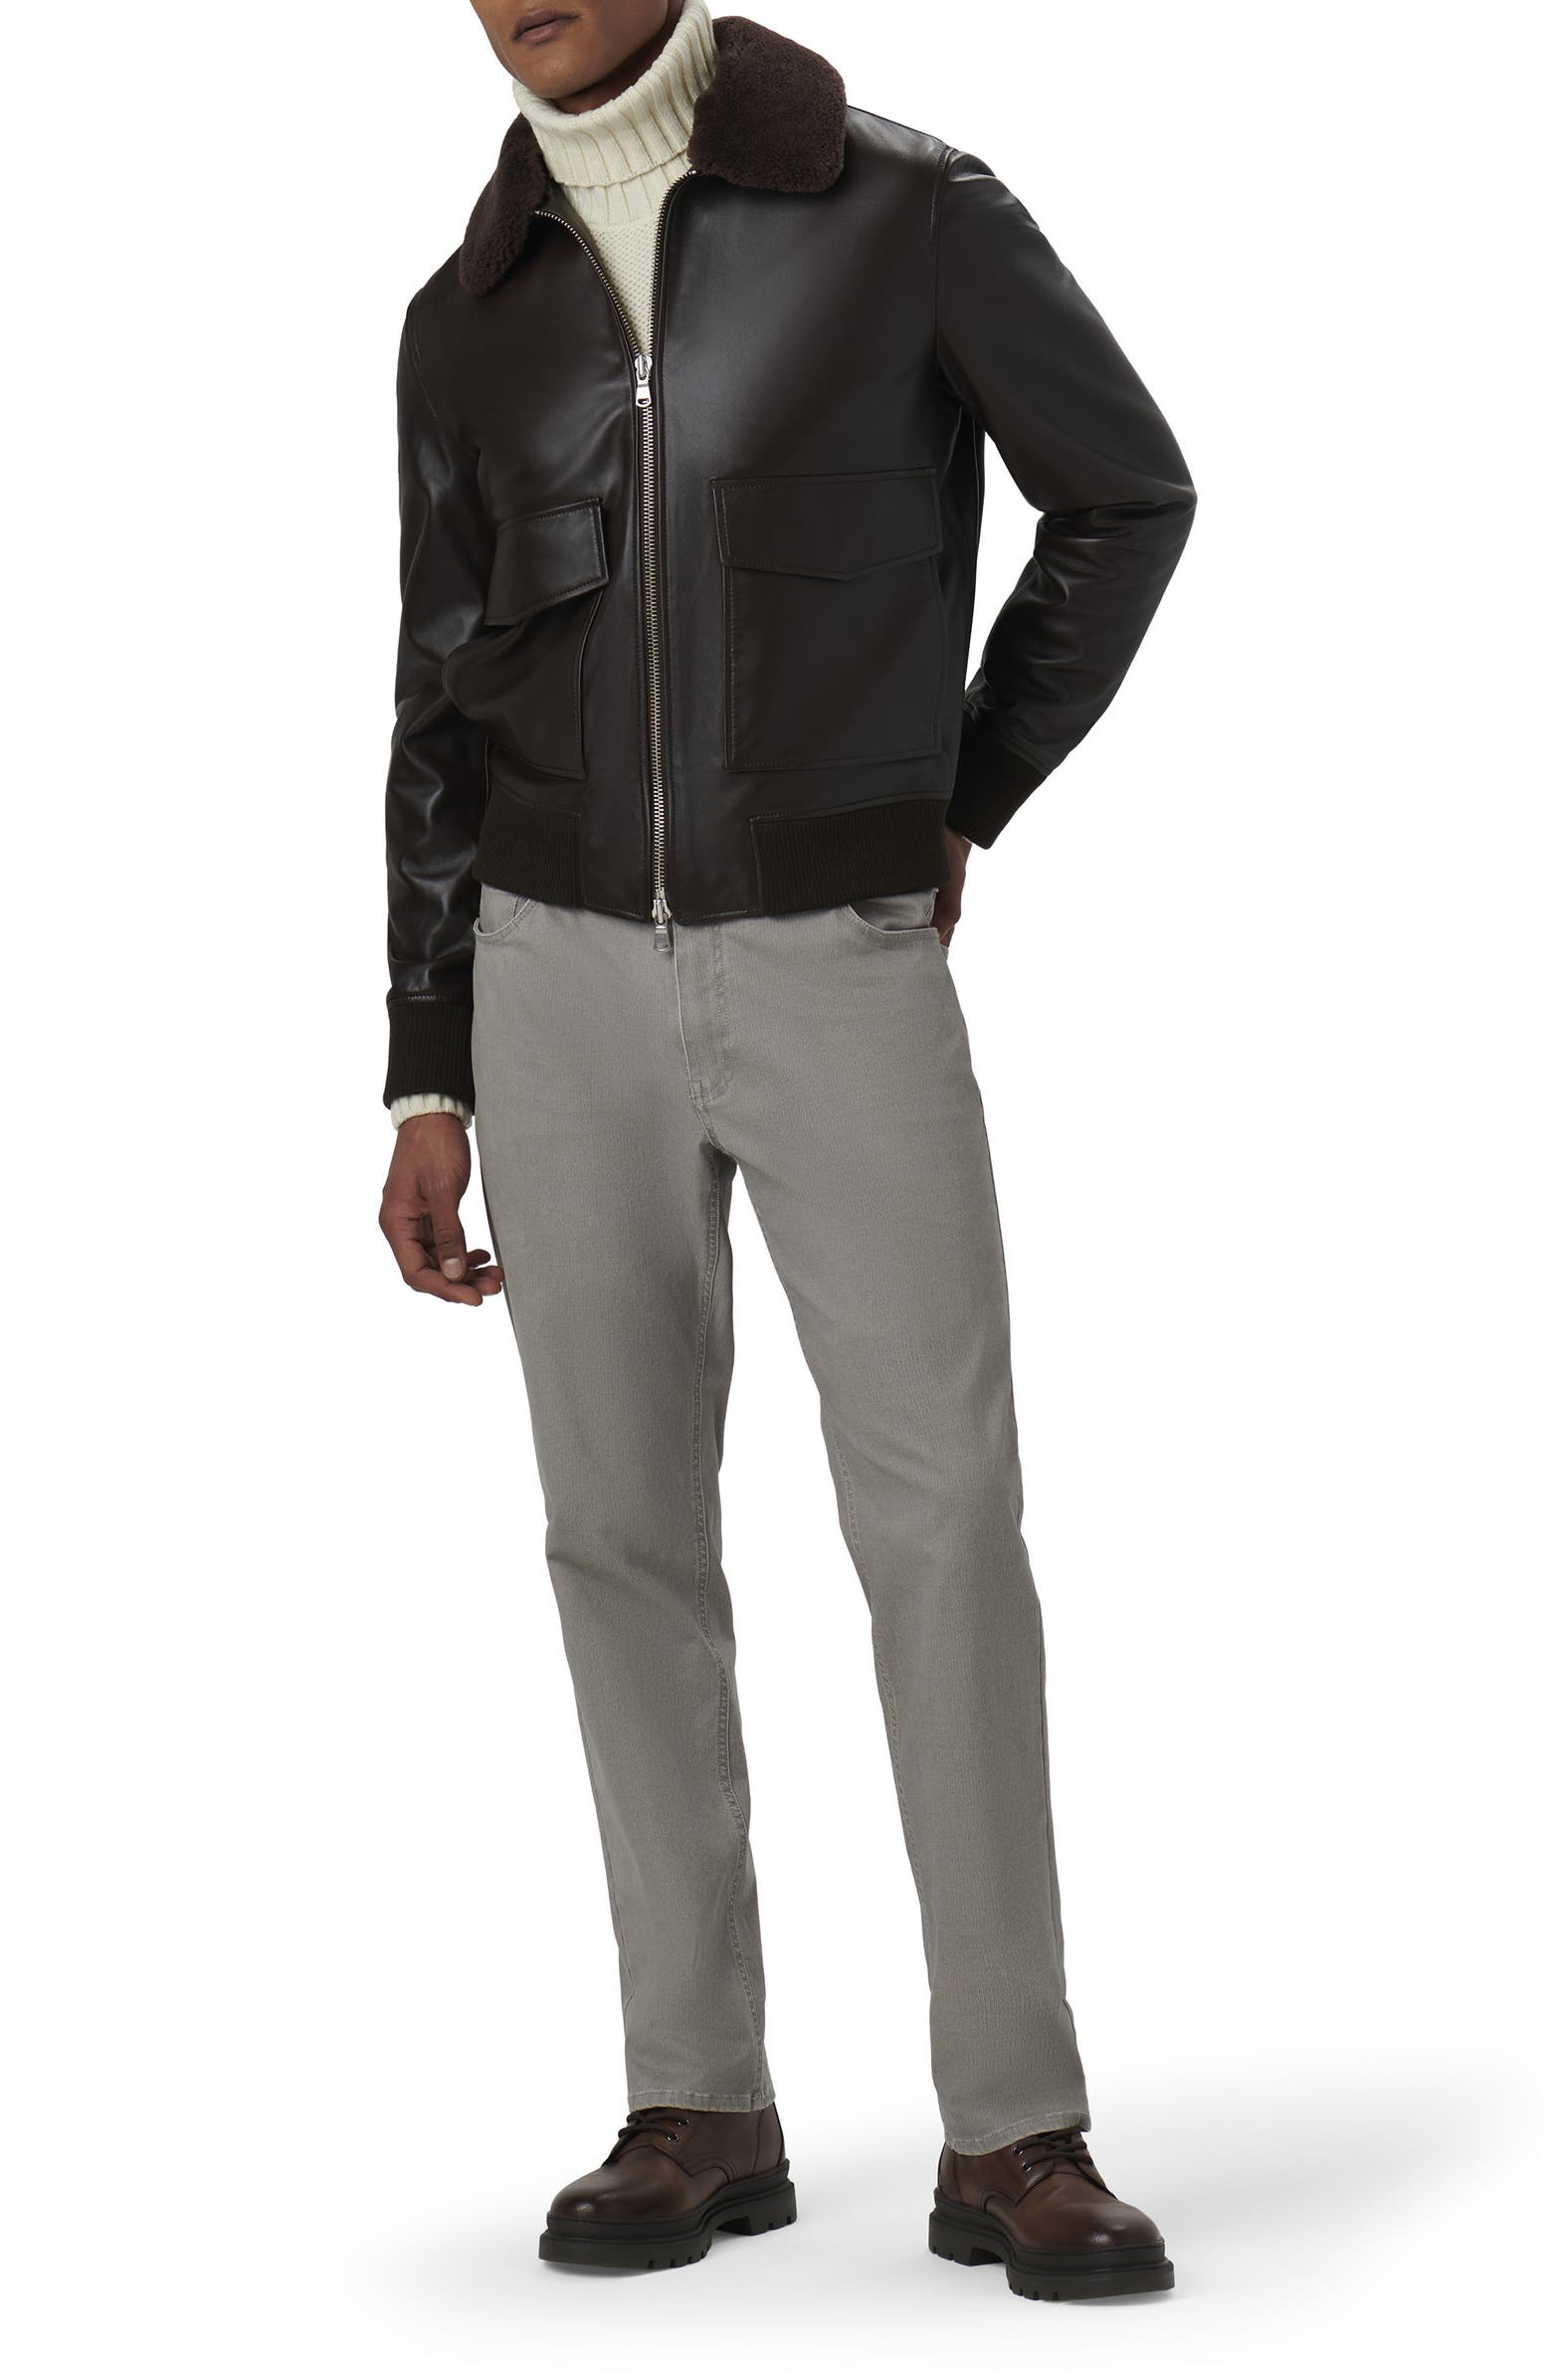 Bugatchi Leather Bomber Jacket with Removable Genuine Shearling Collar ...